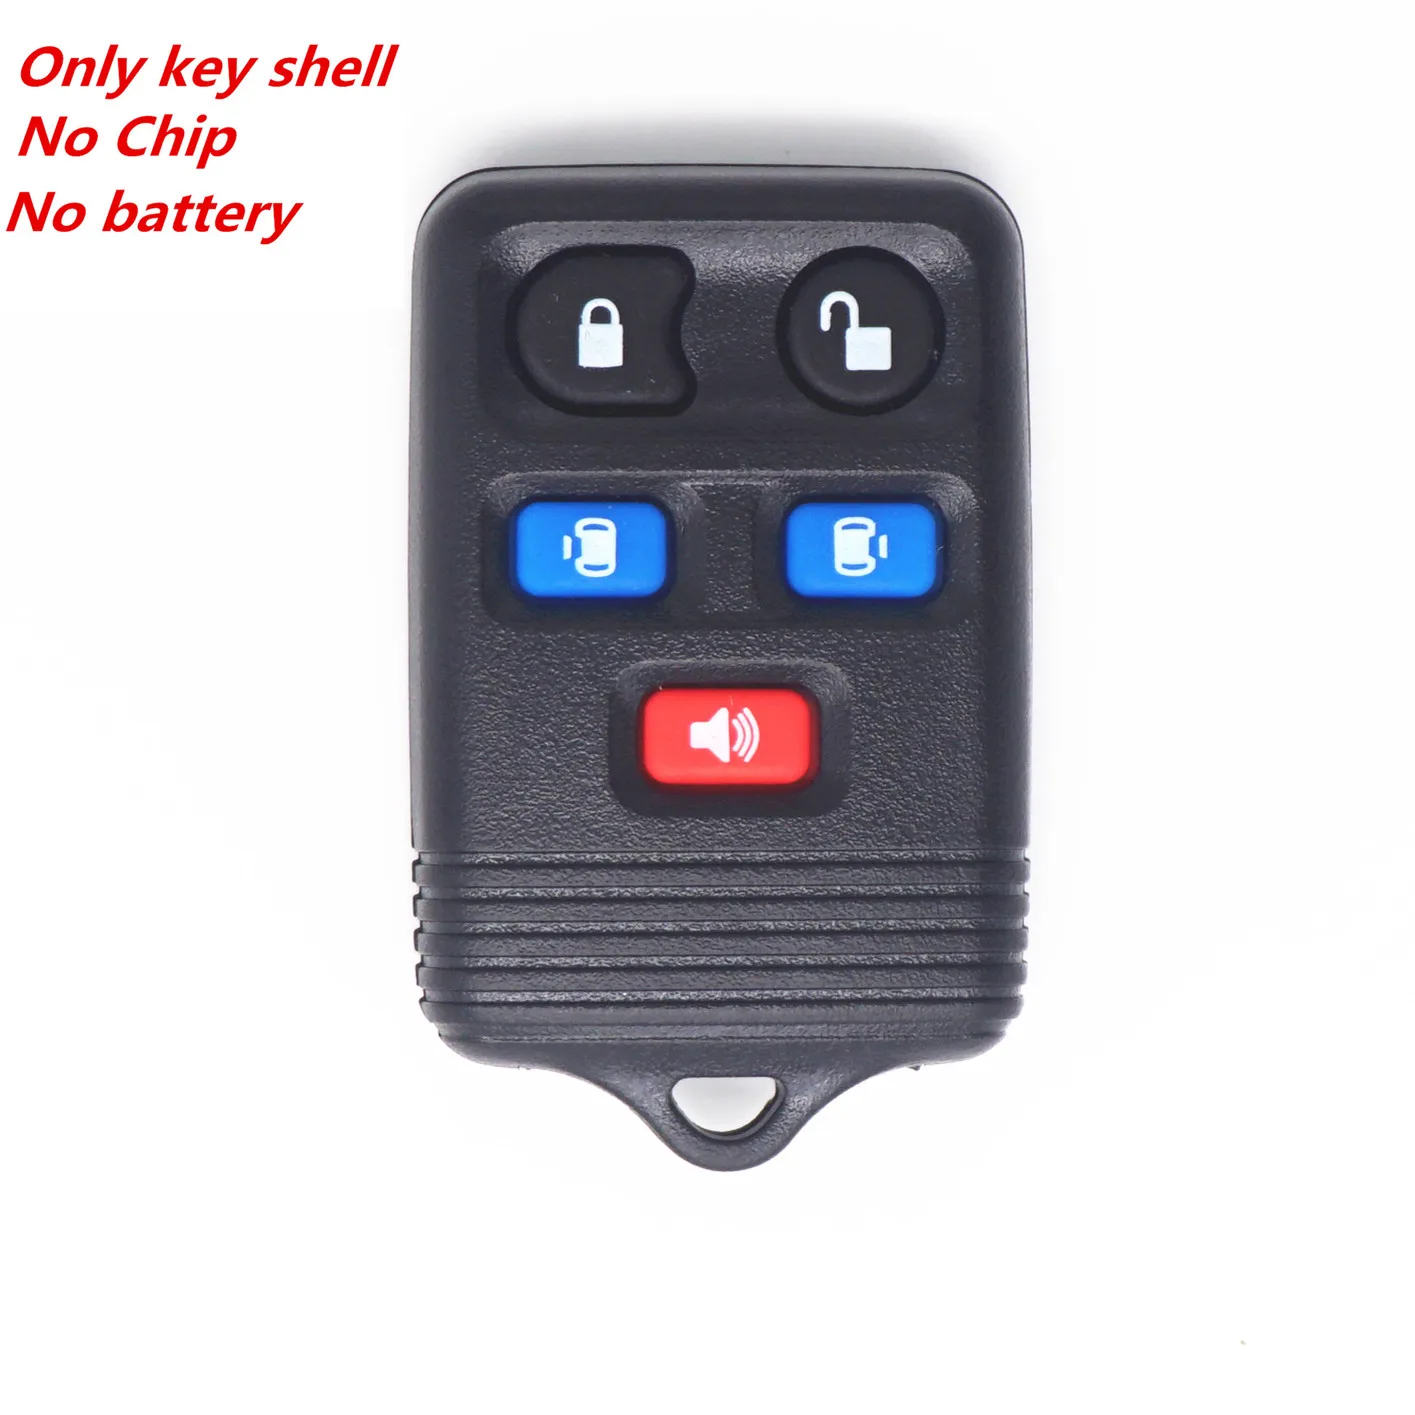 

WFMJ 5 Buttons Remote Smart Key Case Chain Shell for Ford Freestar Expedition Windstar Mercury Monterey Lincoln Navigator